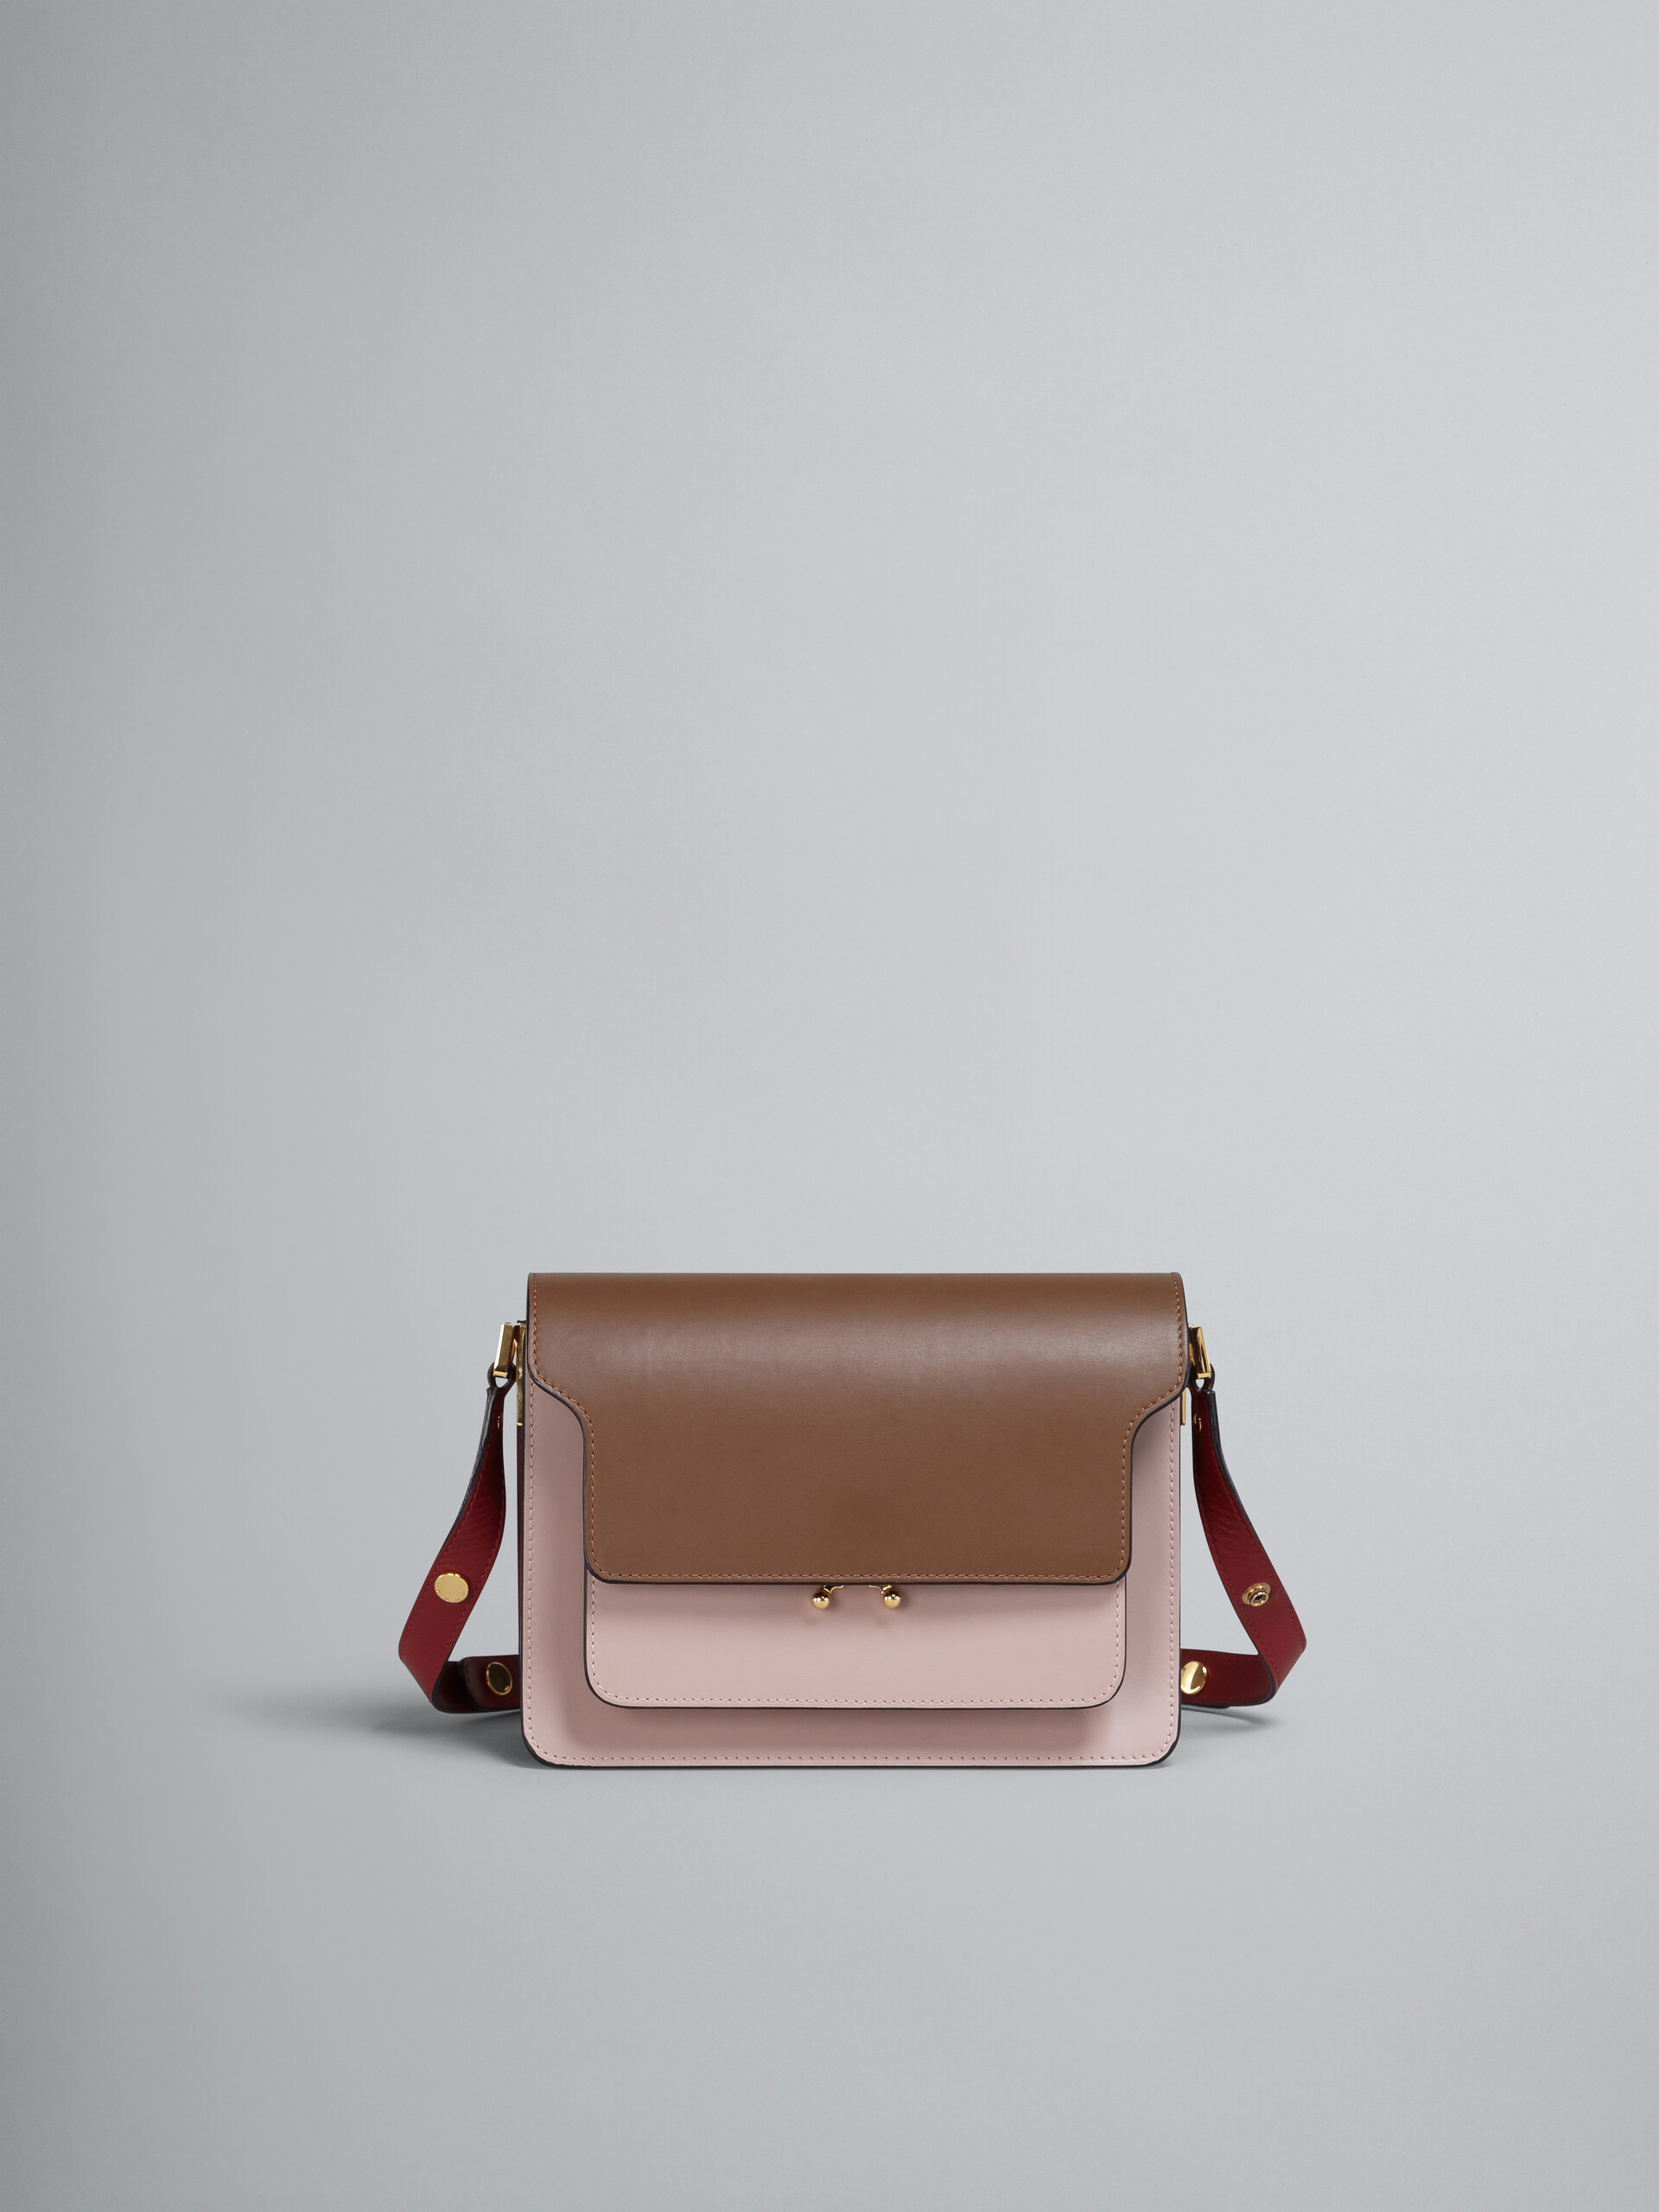 TRUNK medium bag in brown pink and red leather - Shoulder Bags - Image 1